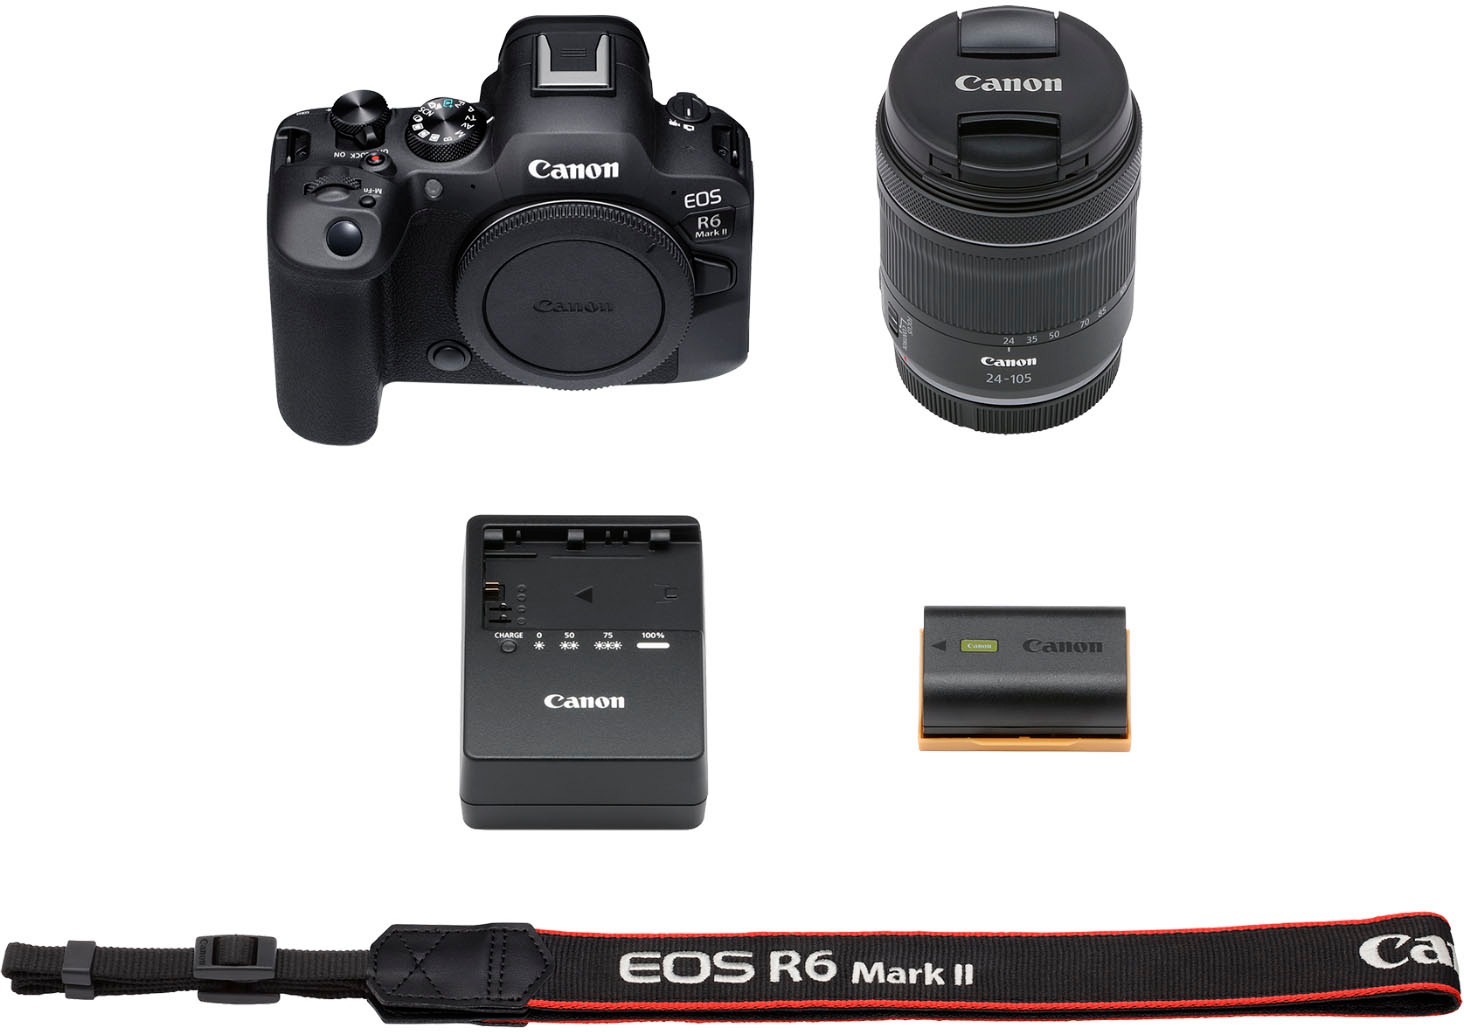 Mark RF Lens EOS Black STM 24-105mm Canon Best R6 with IS II - Buy Mirrorless 5666C018 Camera f/4-7.1